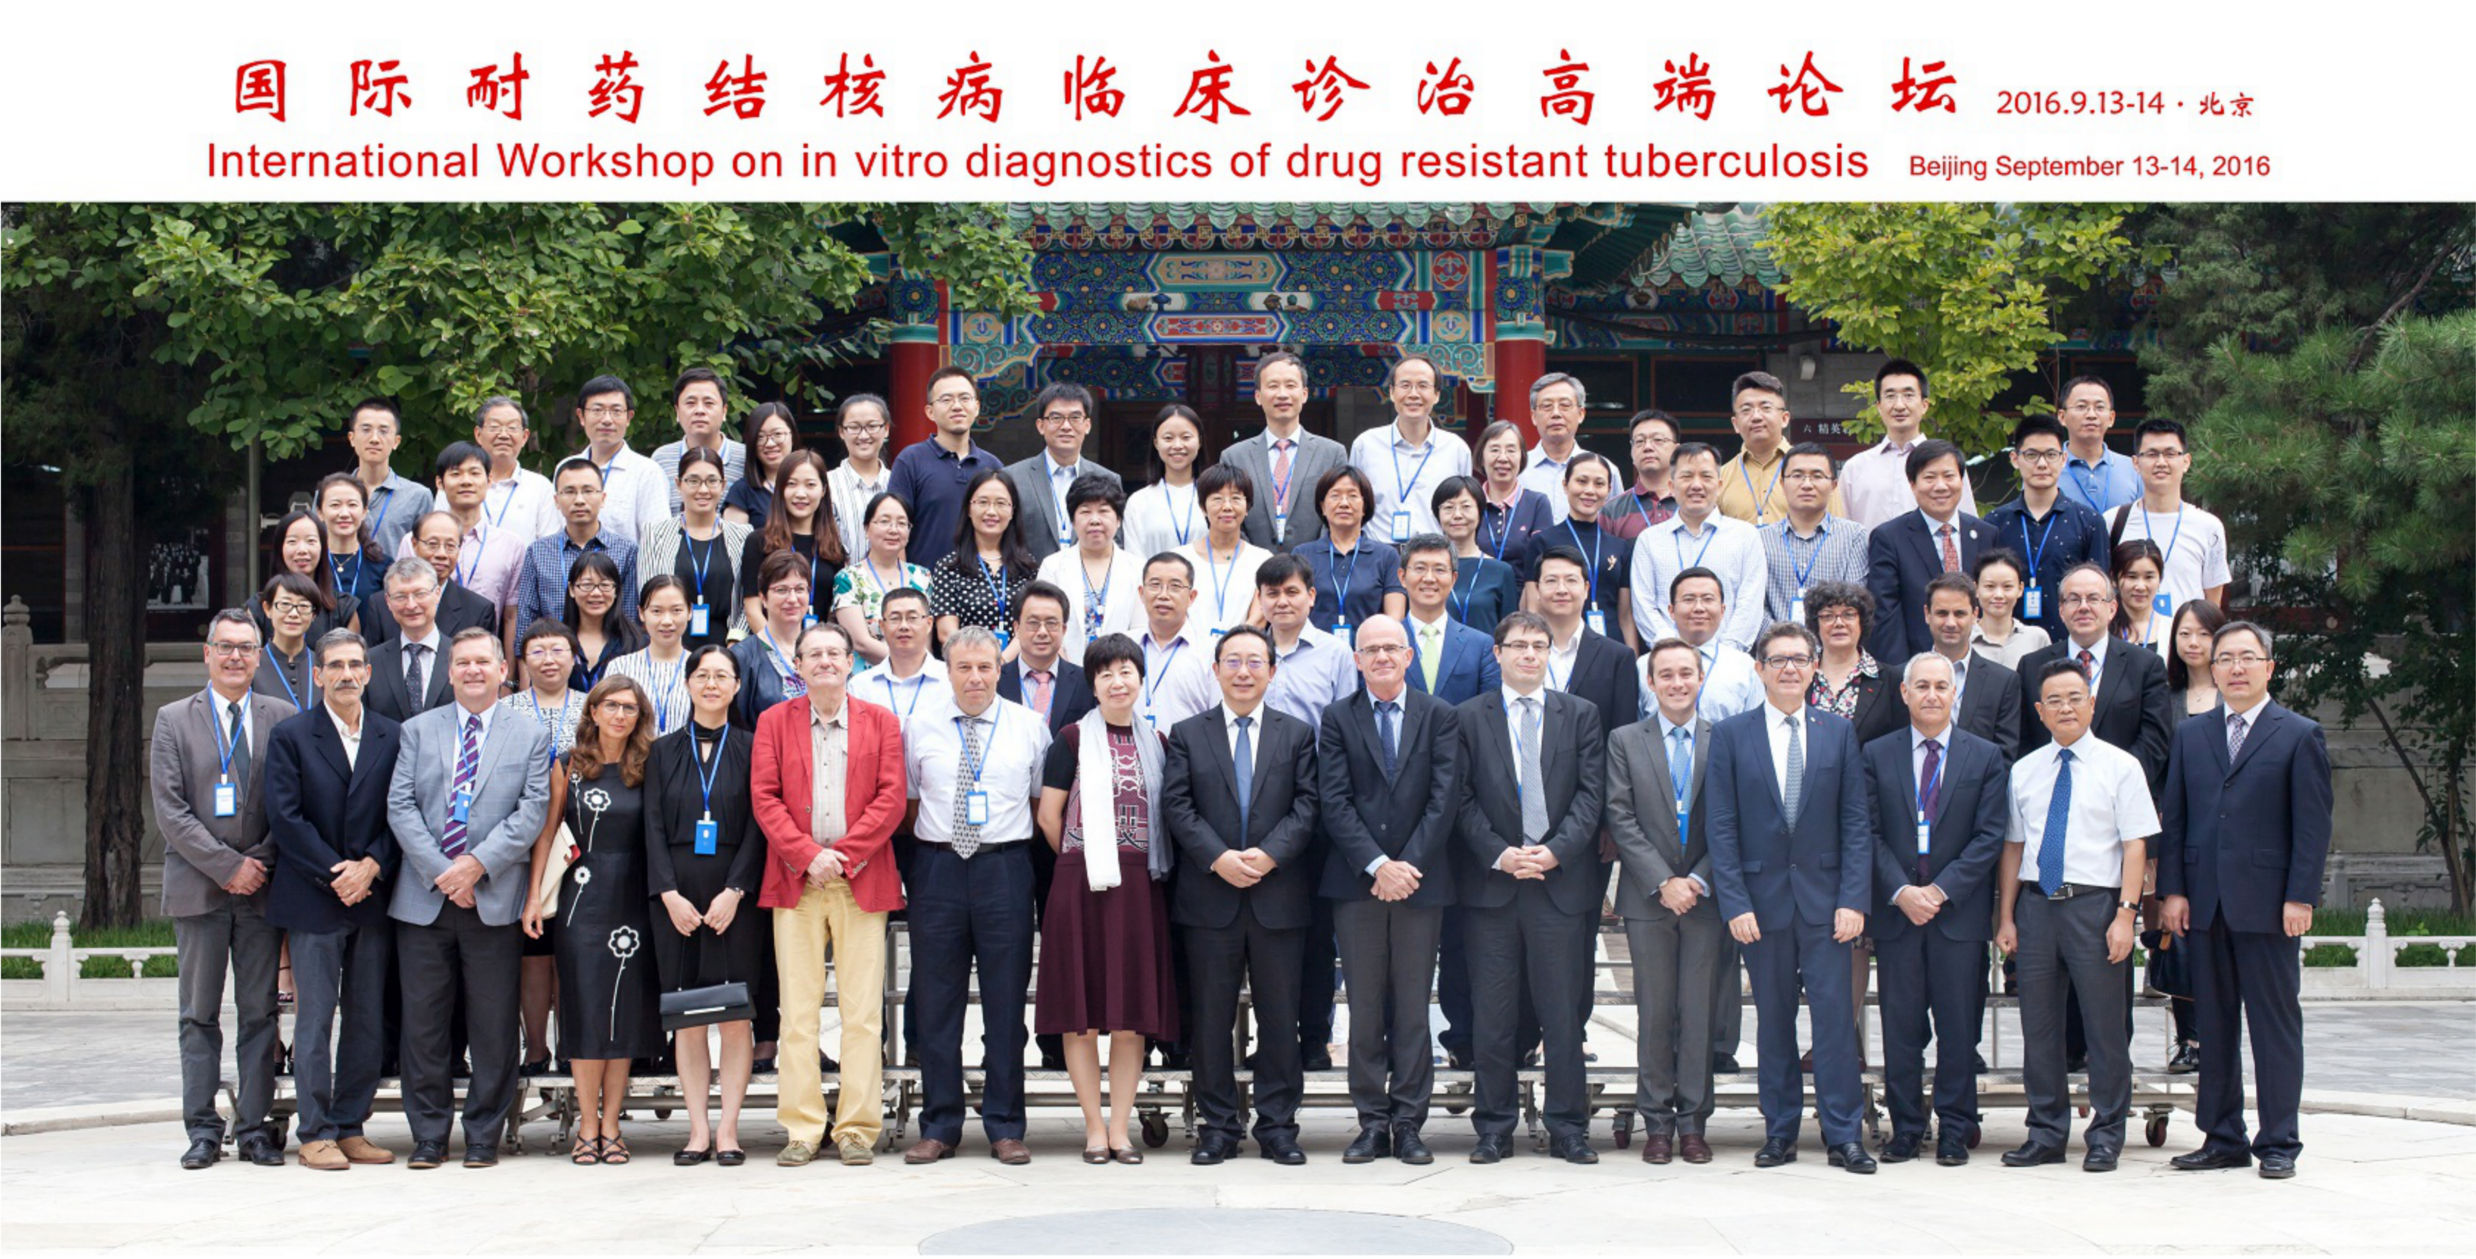 group photo of employees from Chinese Academy of Medical Sciences, Chinese Center for Disease Control and Institut Mérieux